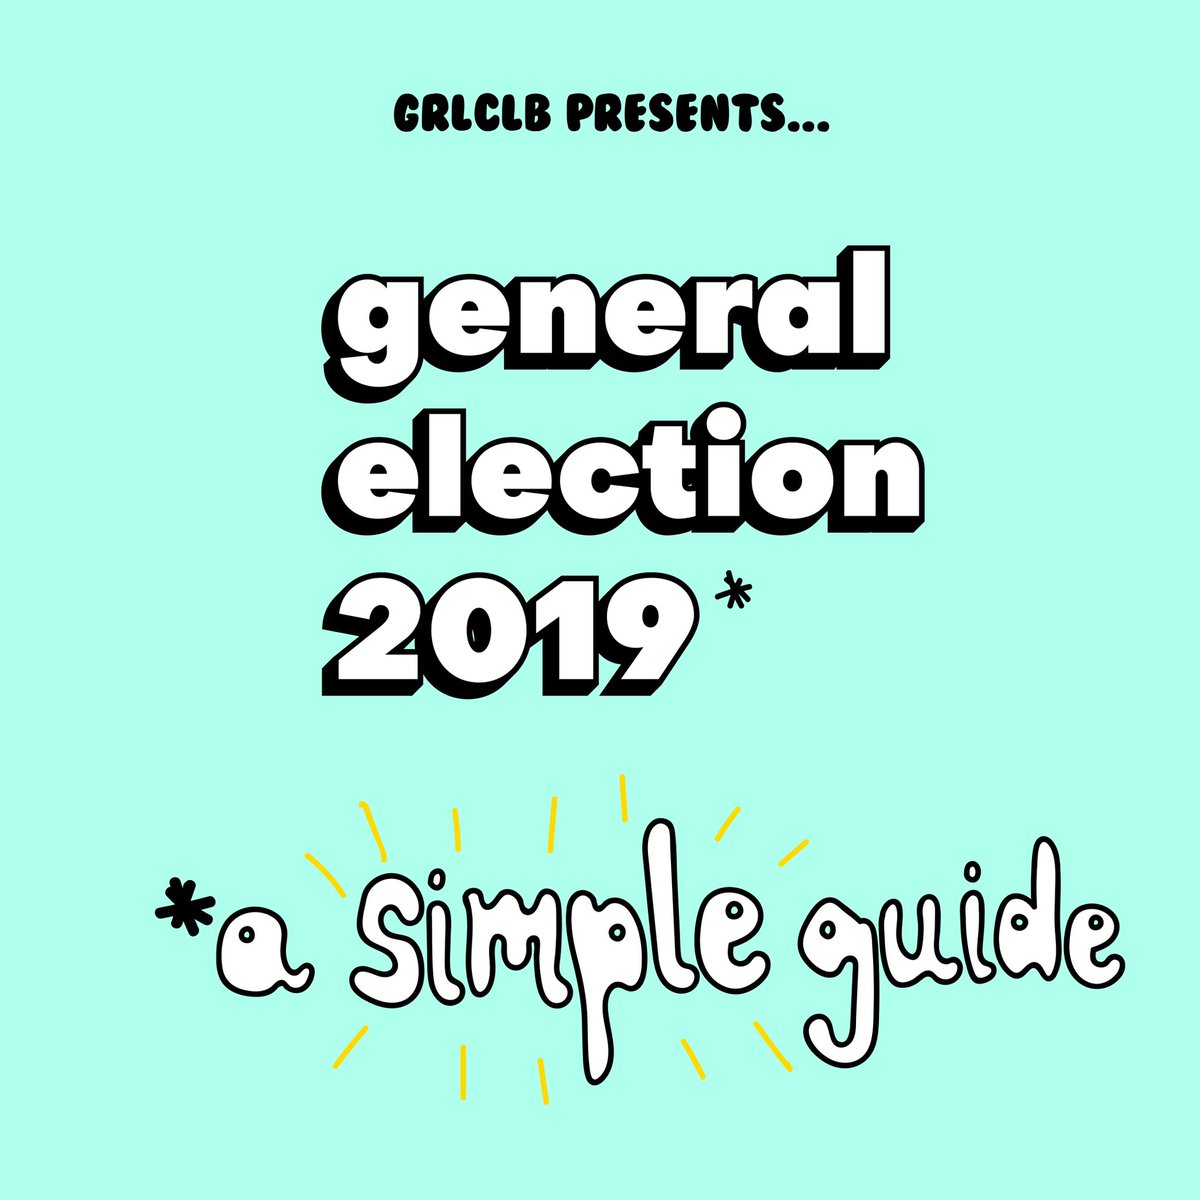 hello I made an infographic thing about the election. it isn’t about who to vote for, just about how an election actually works and where your vote goes. the system is [intentionally] complicated so I thought I’d make it easy. 10 slides so see next 2 tweets for the full thing!